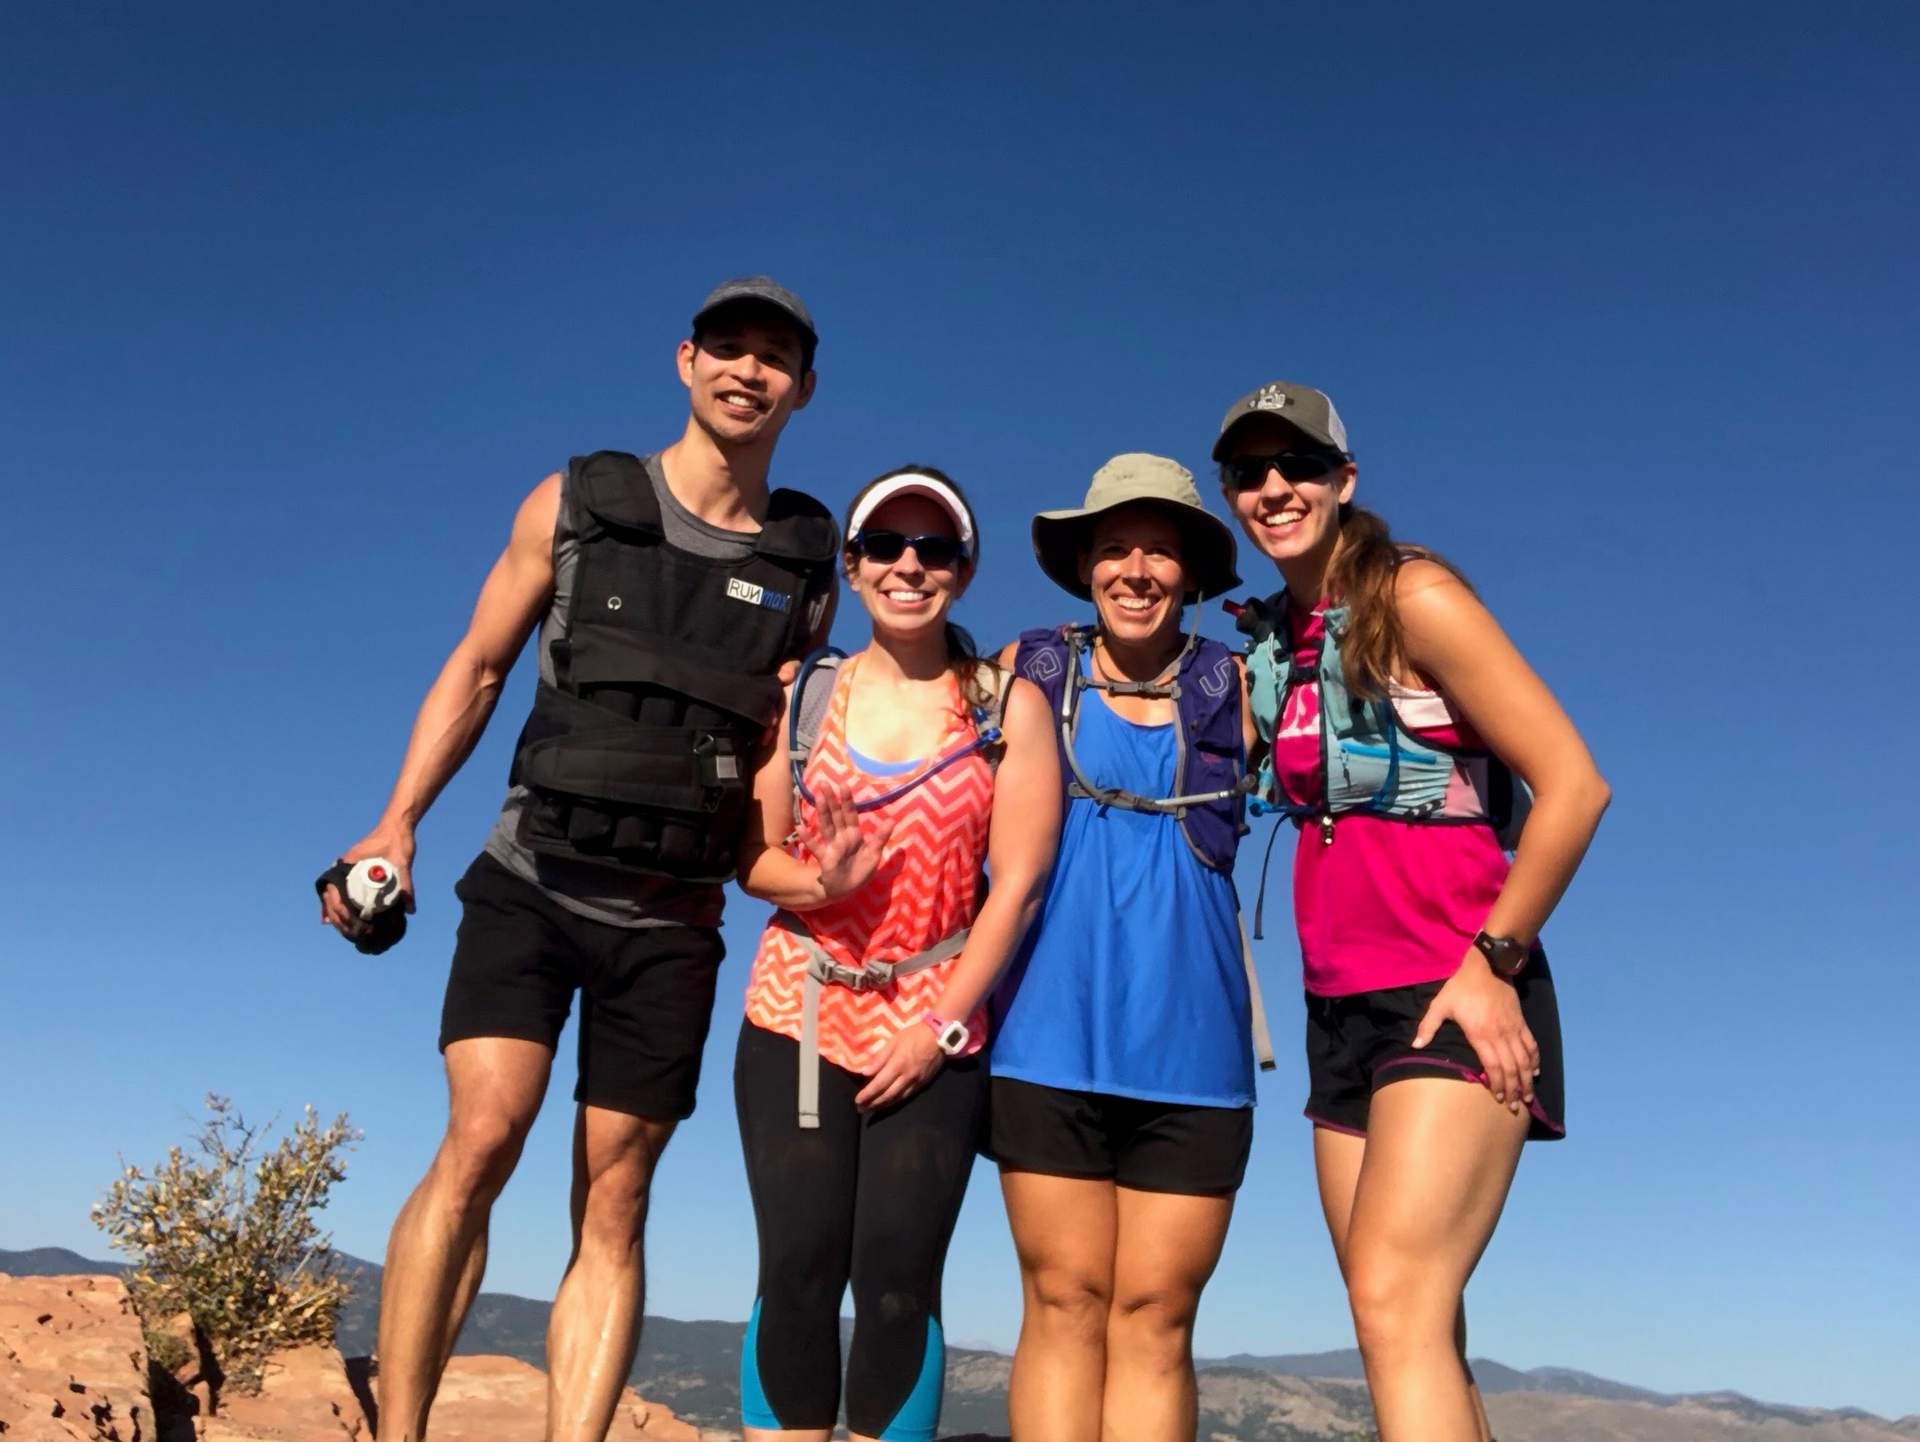 Doing a 17-mile trail run on the Blue Sky Trail and Devil's backbone with Chrissy, Jennifer, and Niki... with a weighted vest in 90F heat!